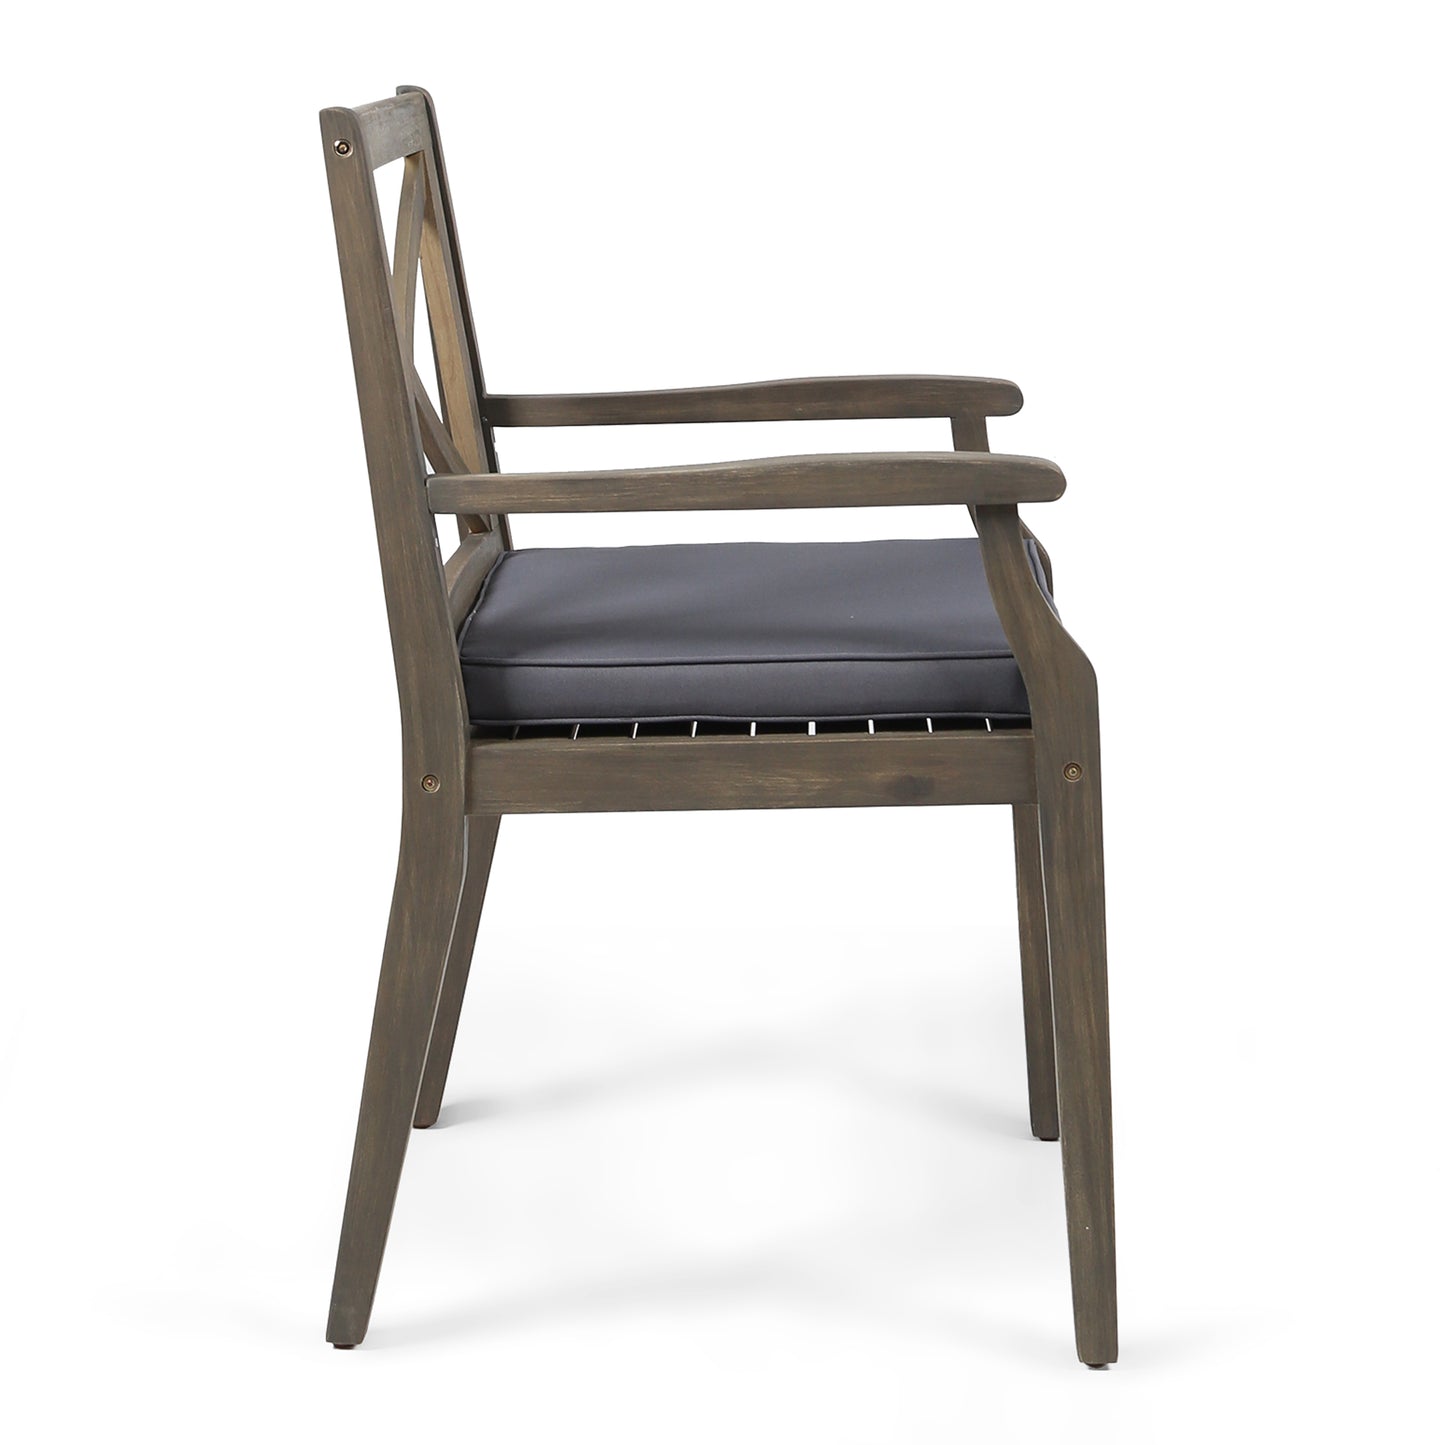 Peter Outdoor Acacia Wood Dining Chair (Set of 2), Grey with Grey Cushions